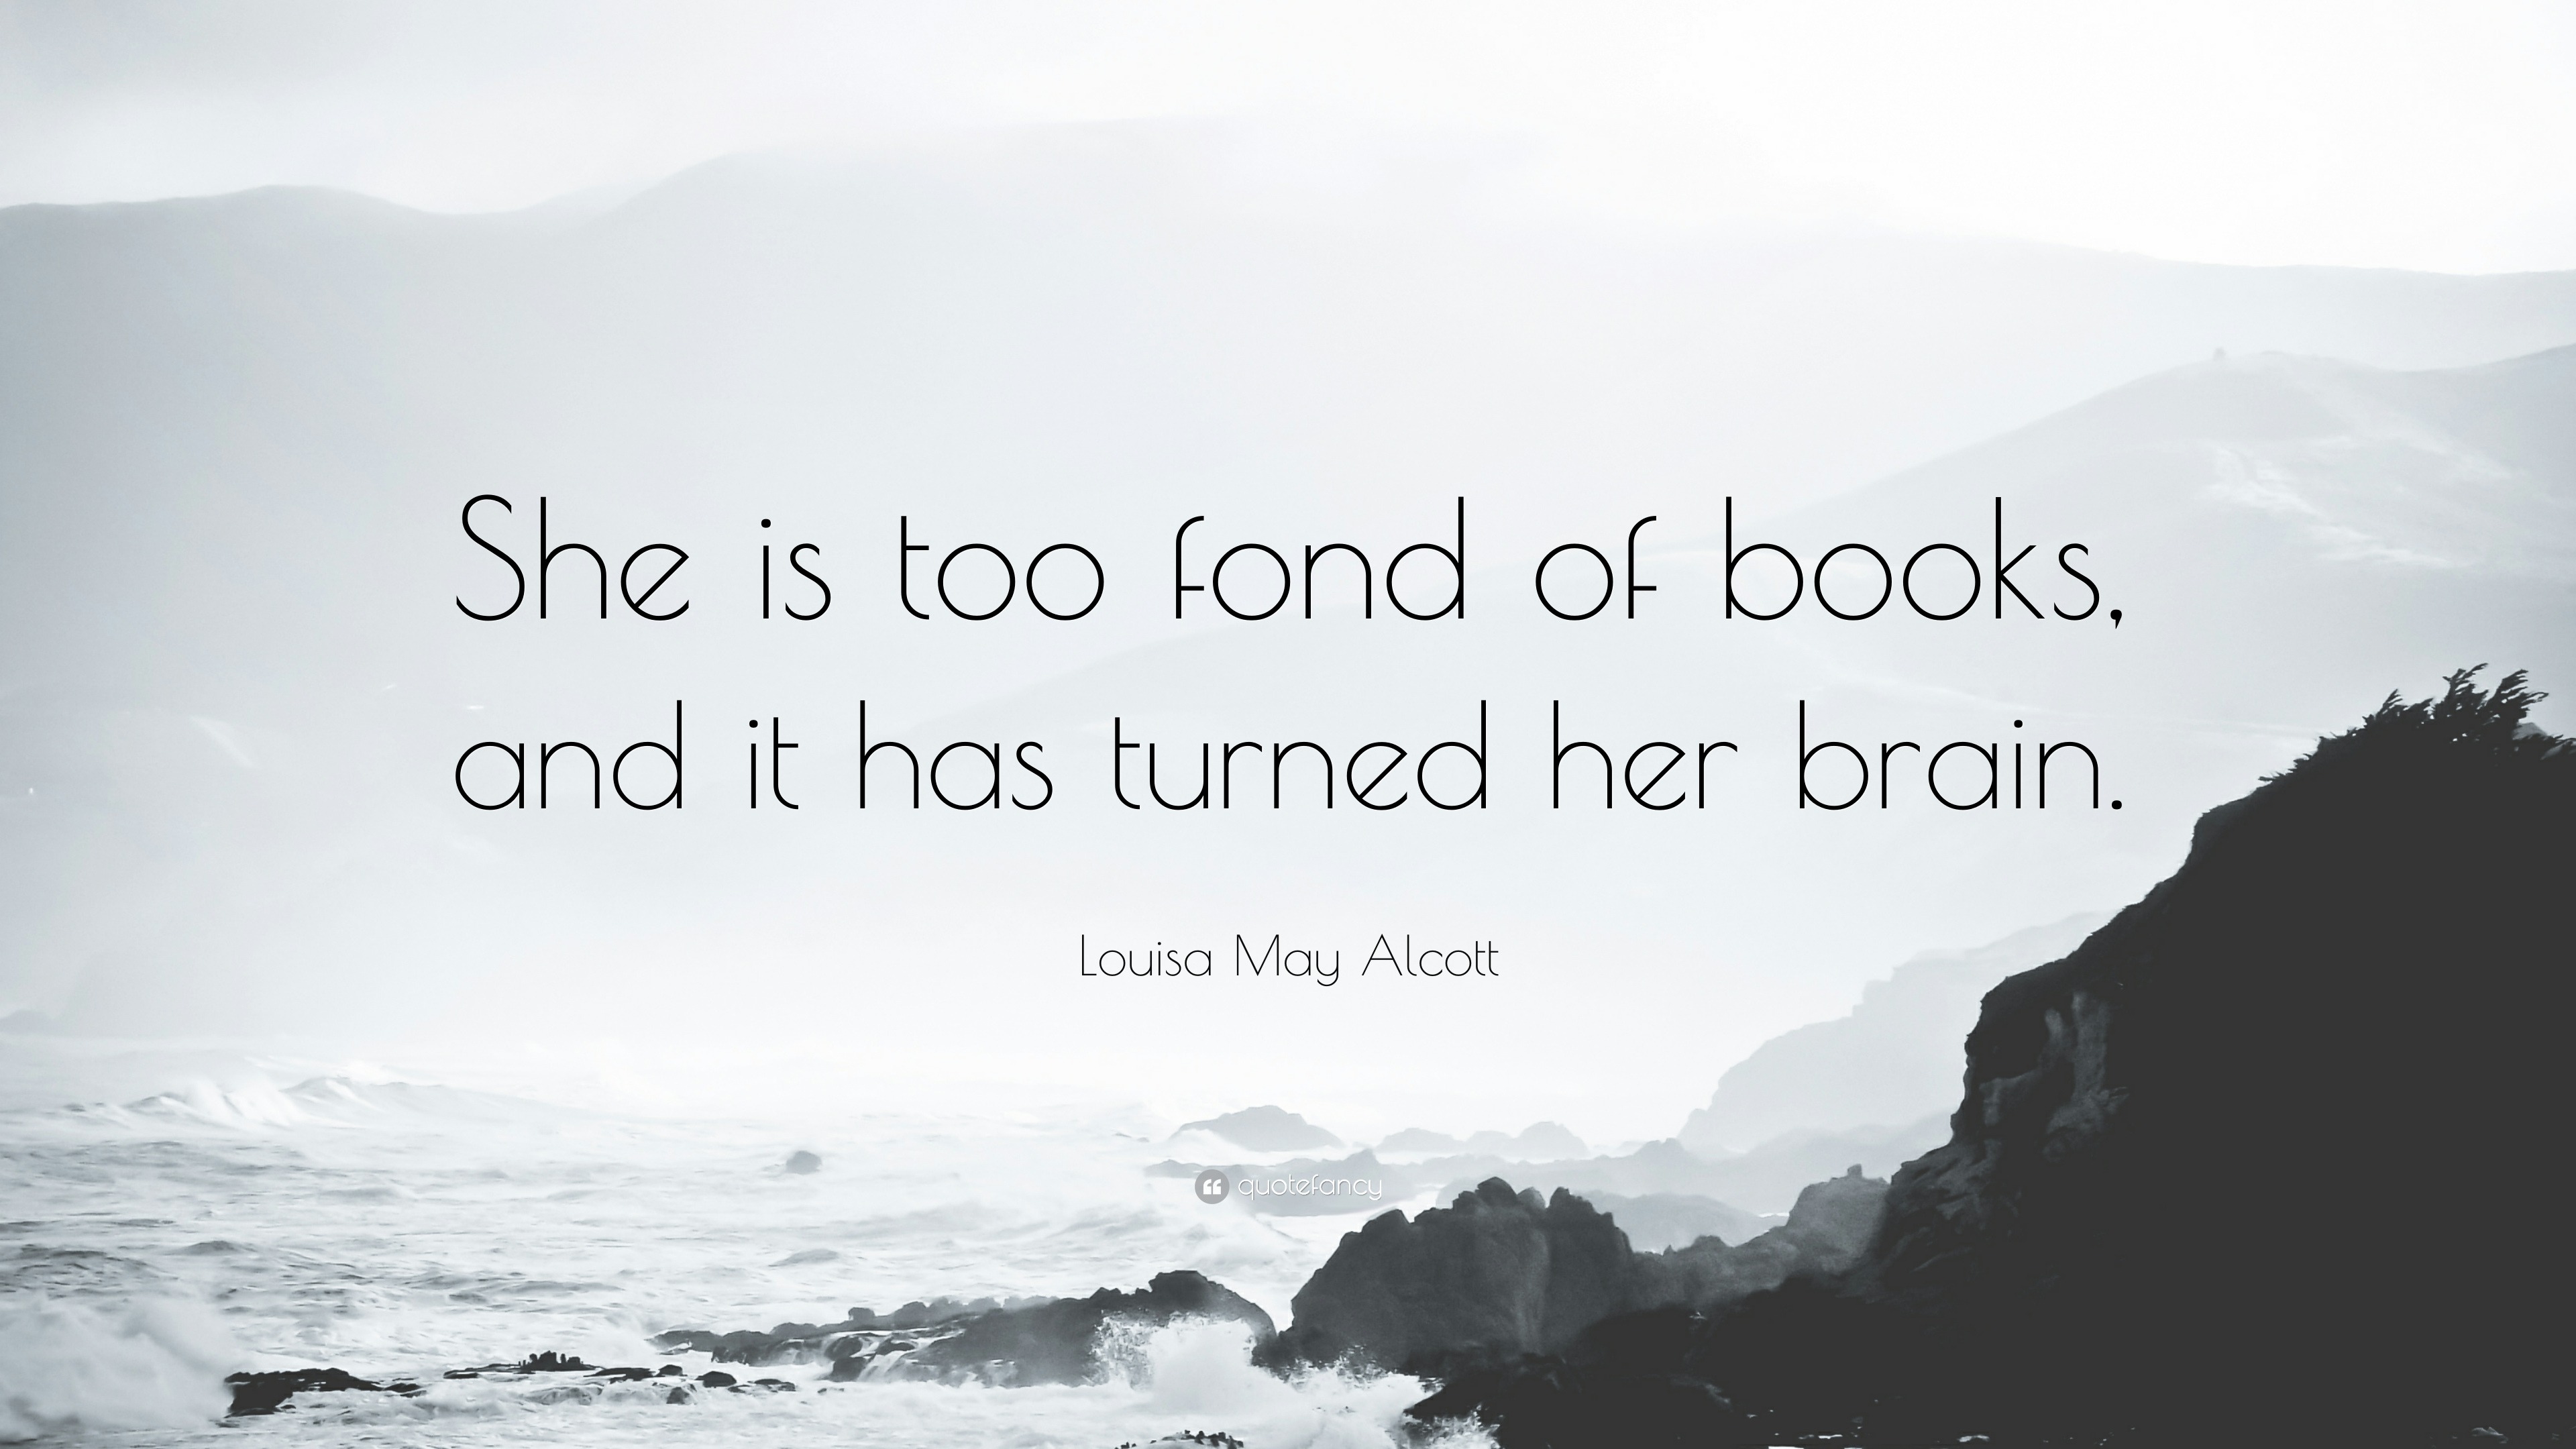 She is too fond of books and it has turned her brain.